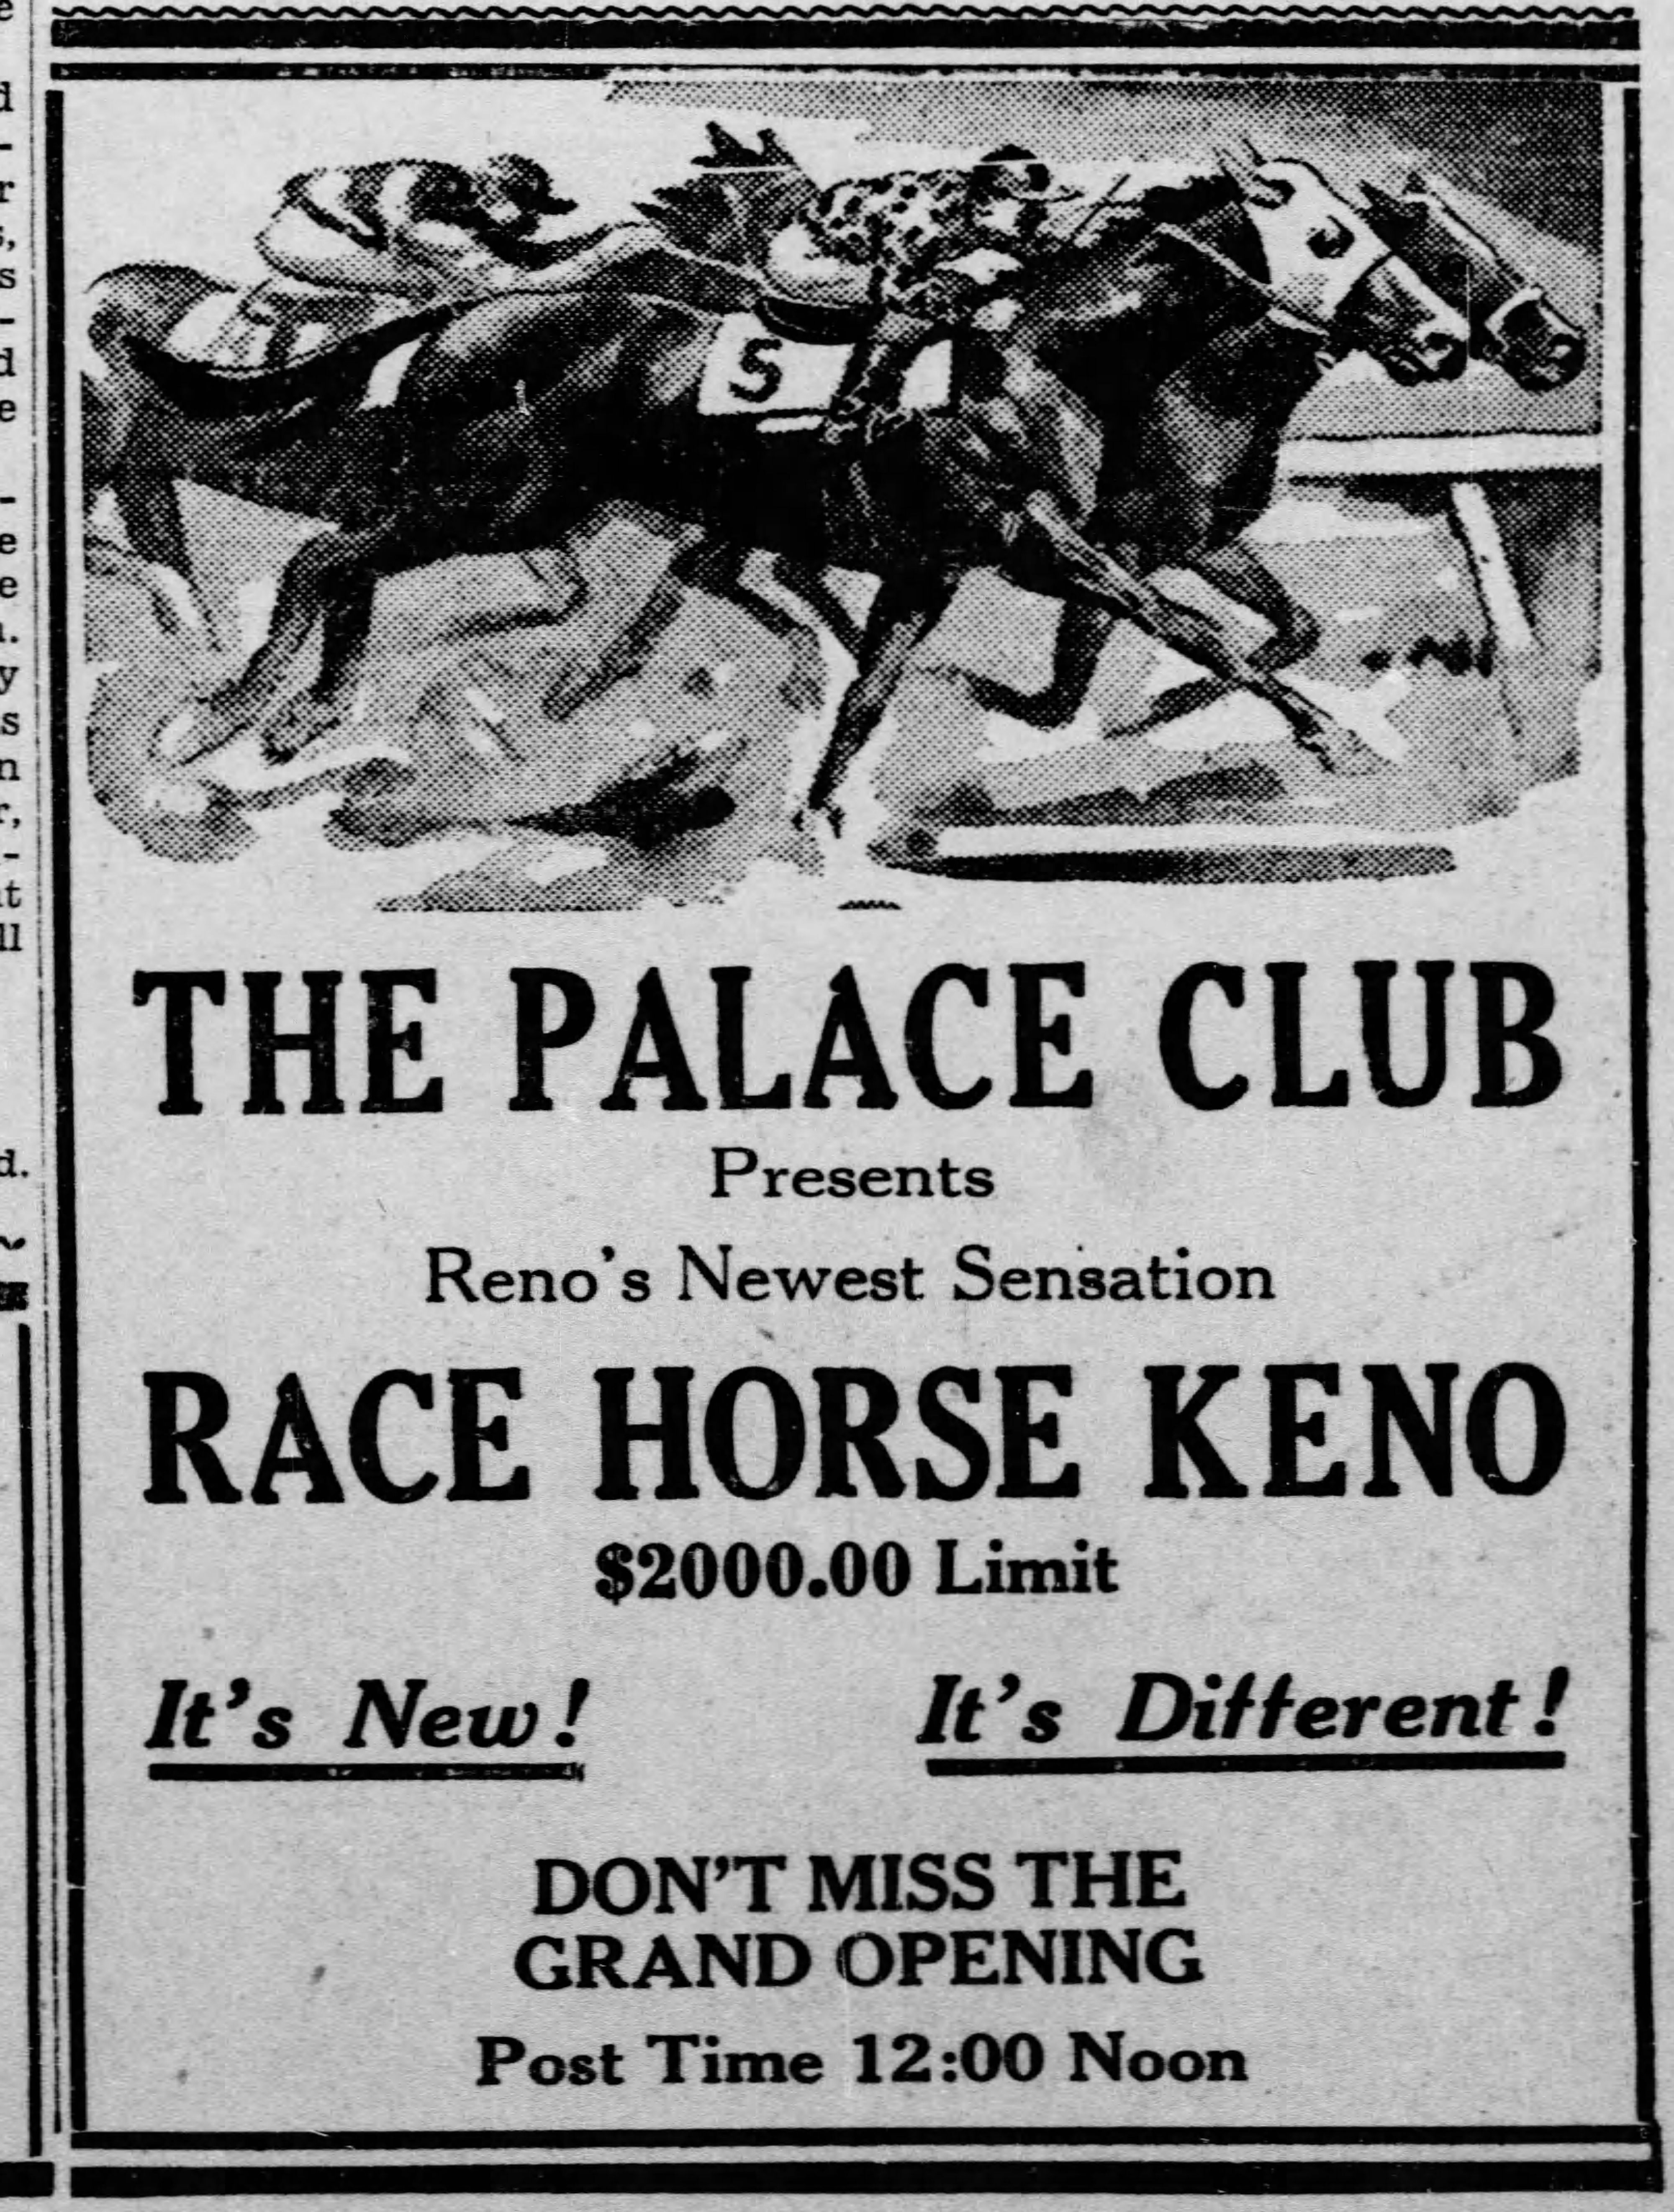 A newspaper advertisement: 'The Palace Club presents Reno's newest sensation: race horse keno. $2000 limit, it's new, it's different, don't miss the grand opening. Post time 12:00 noon.'